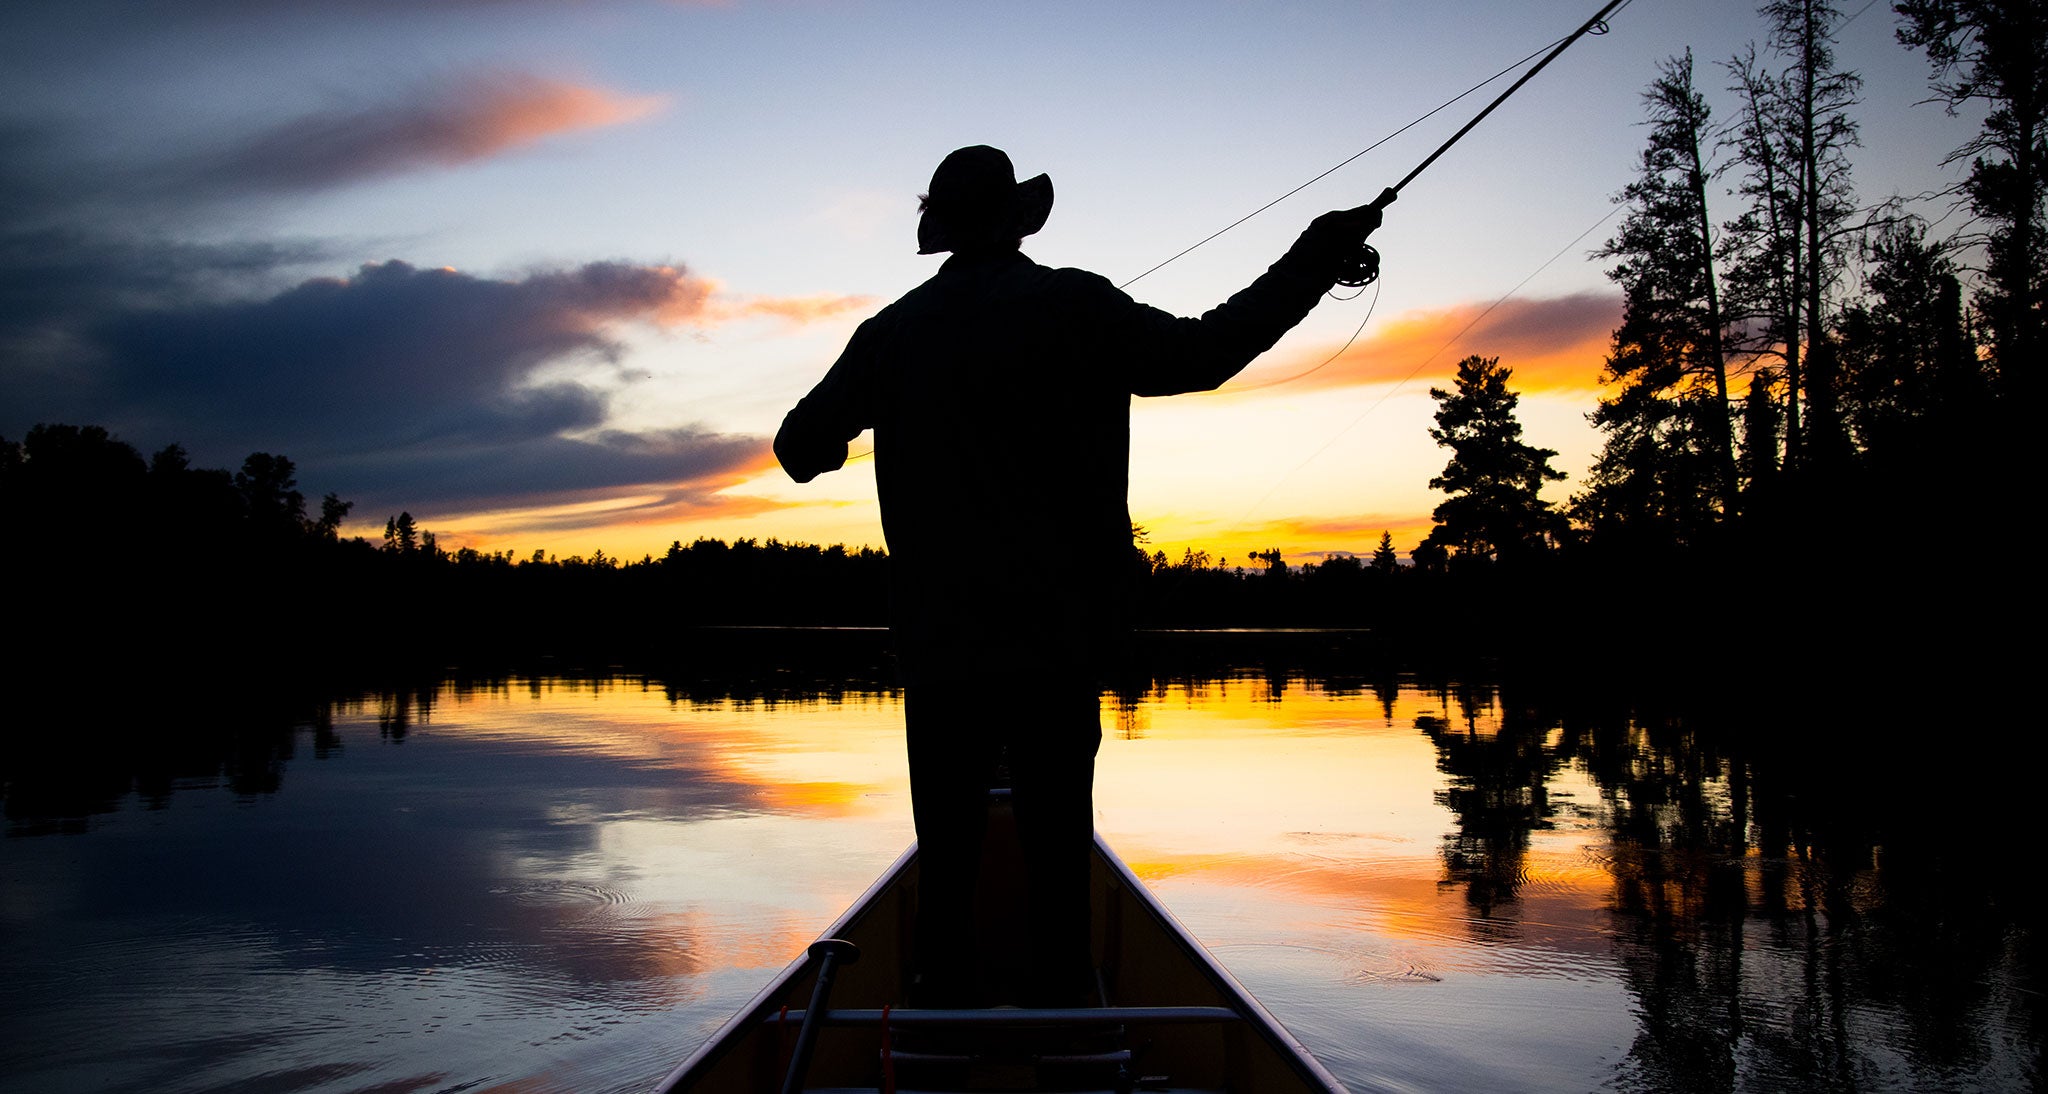 Fly fishing at sunset